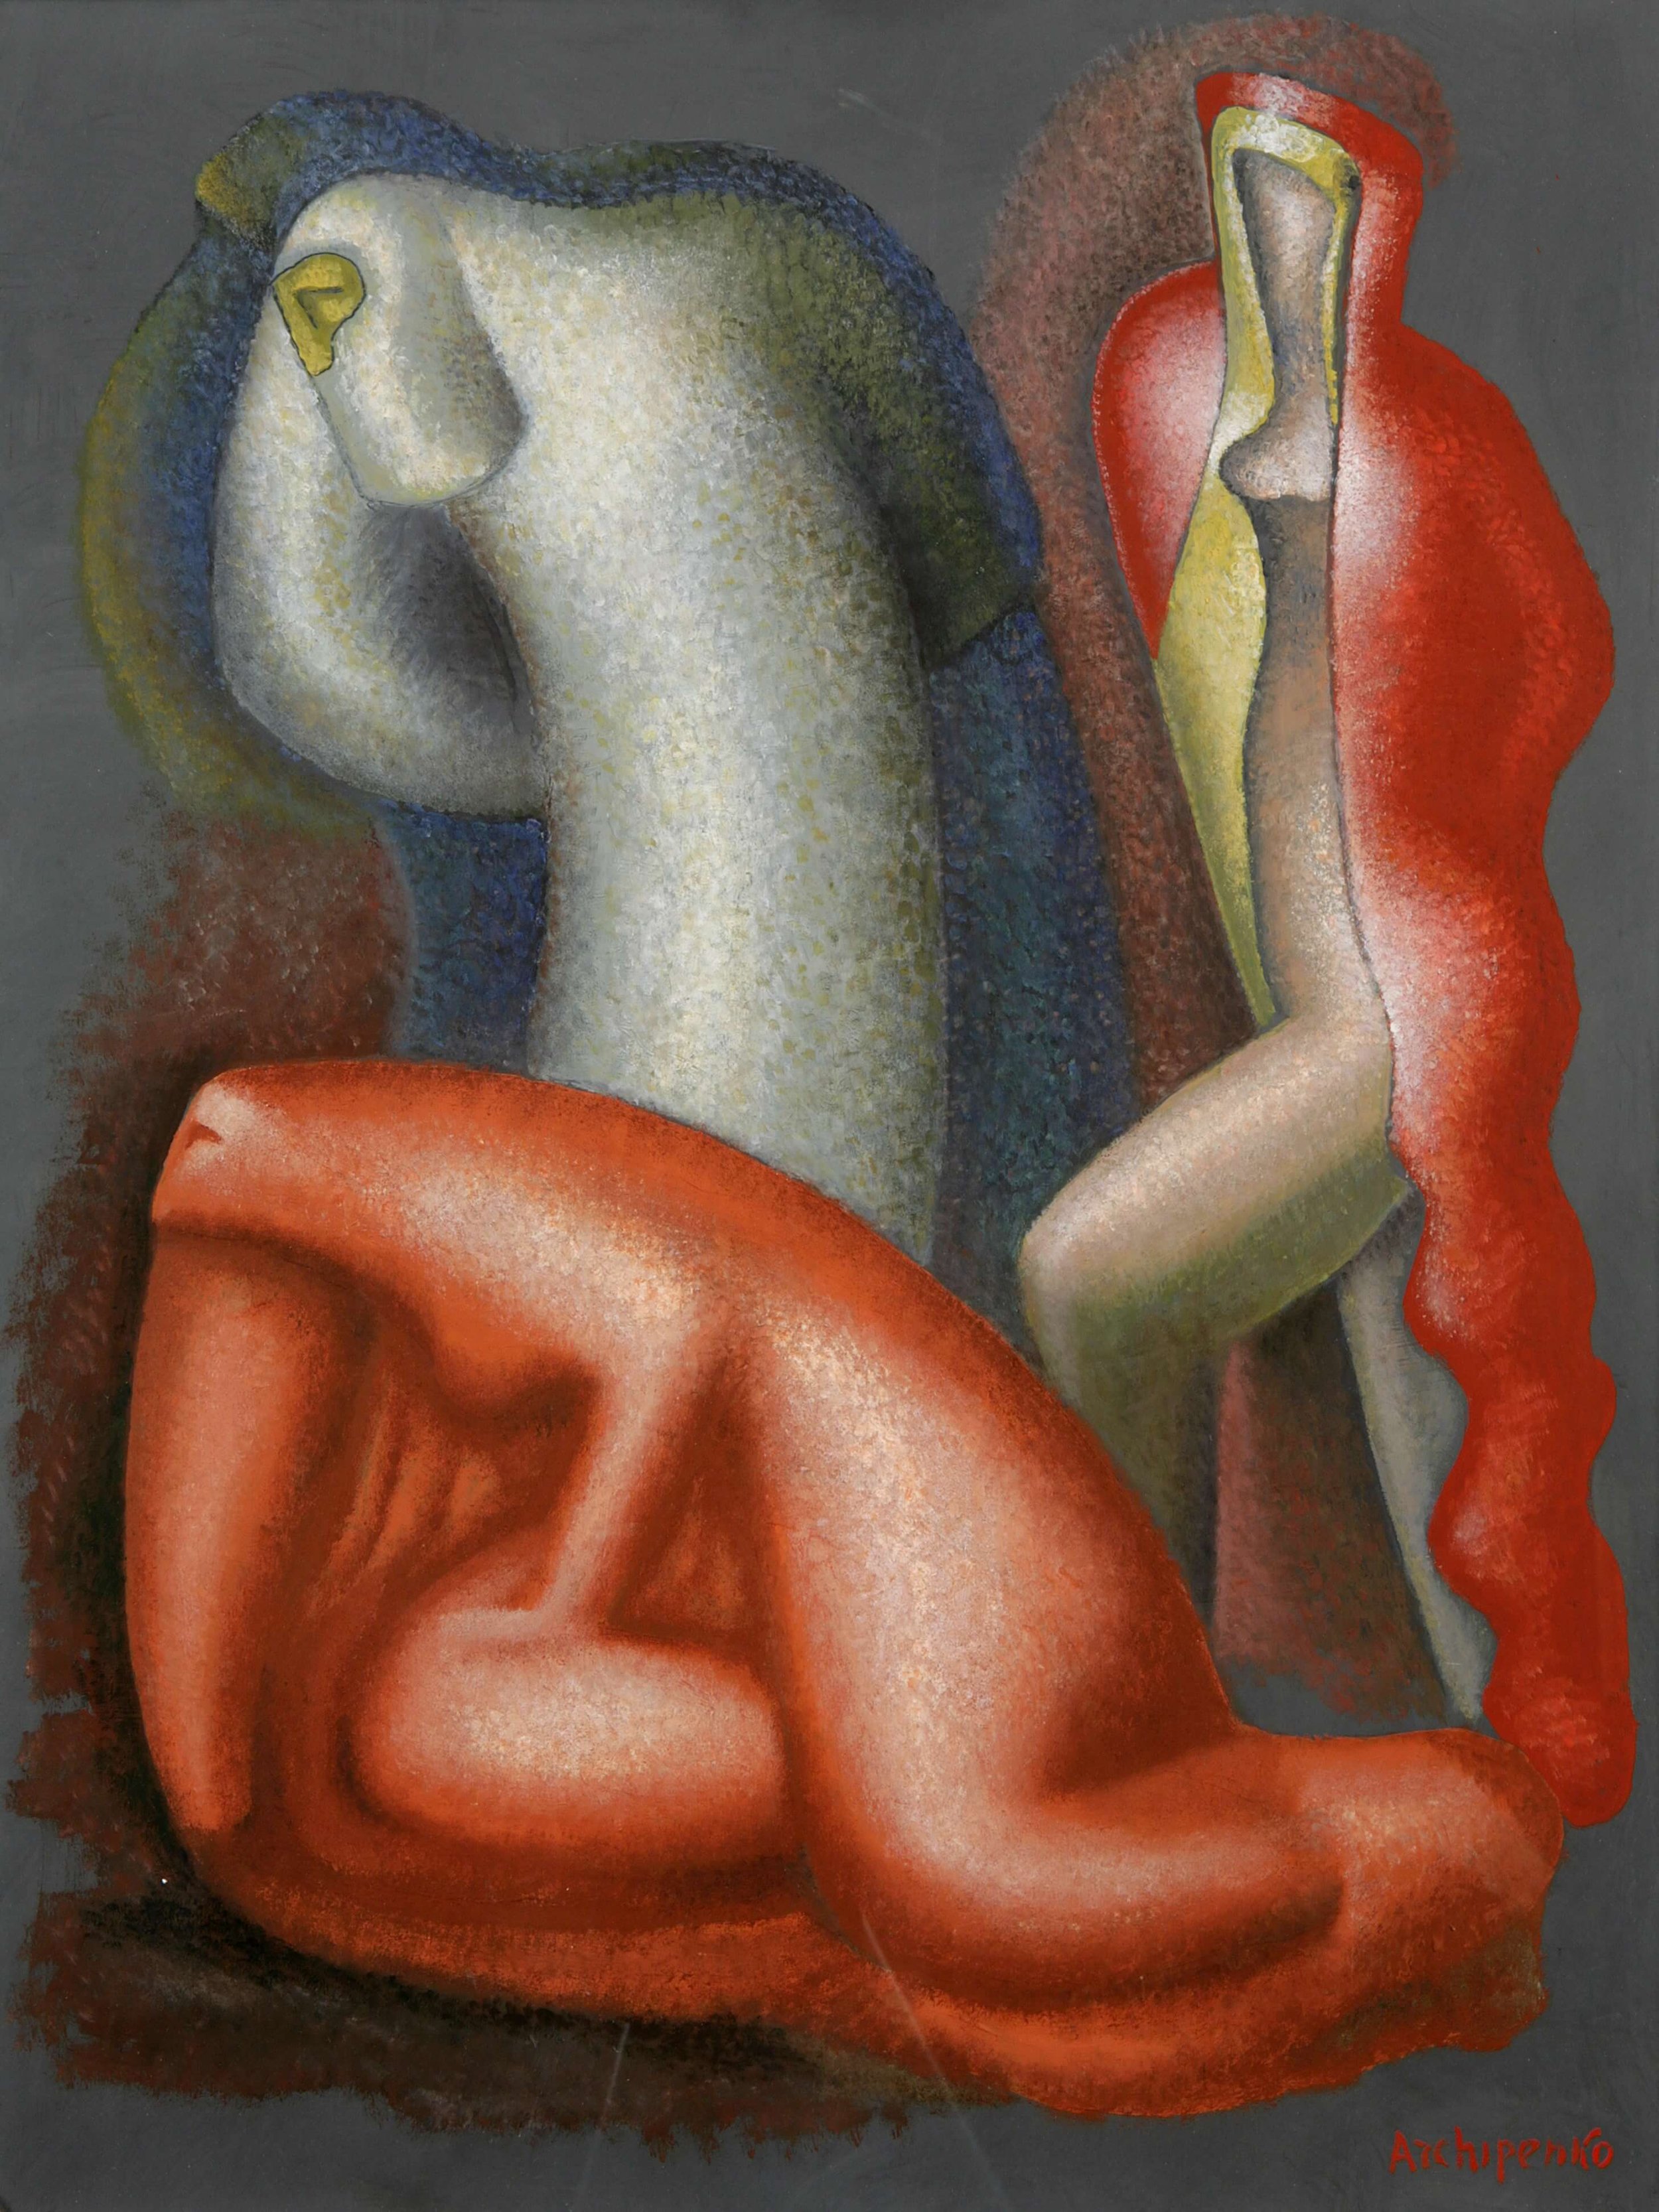 Archipenko Alexander, Ancient Drama, oil and tempera on board, 61 x 46 cm. (24 x 18.1 in.).jpg